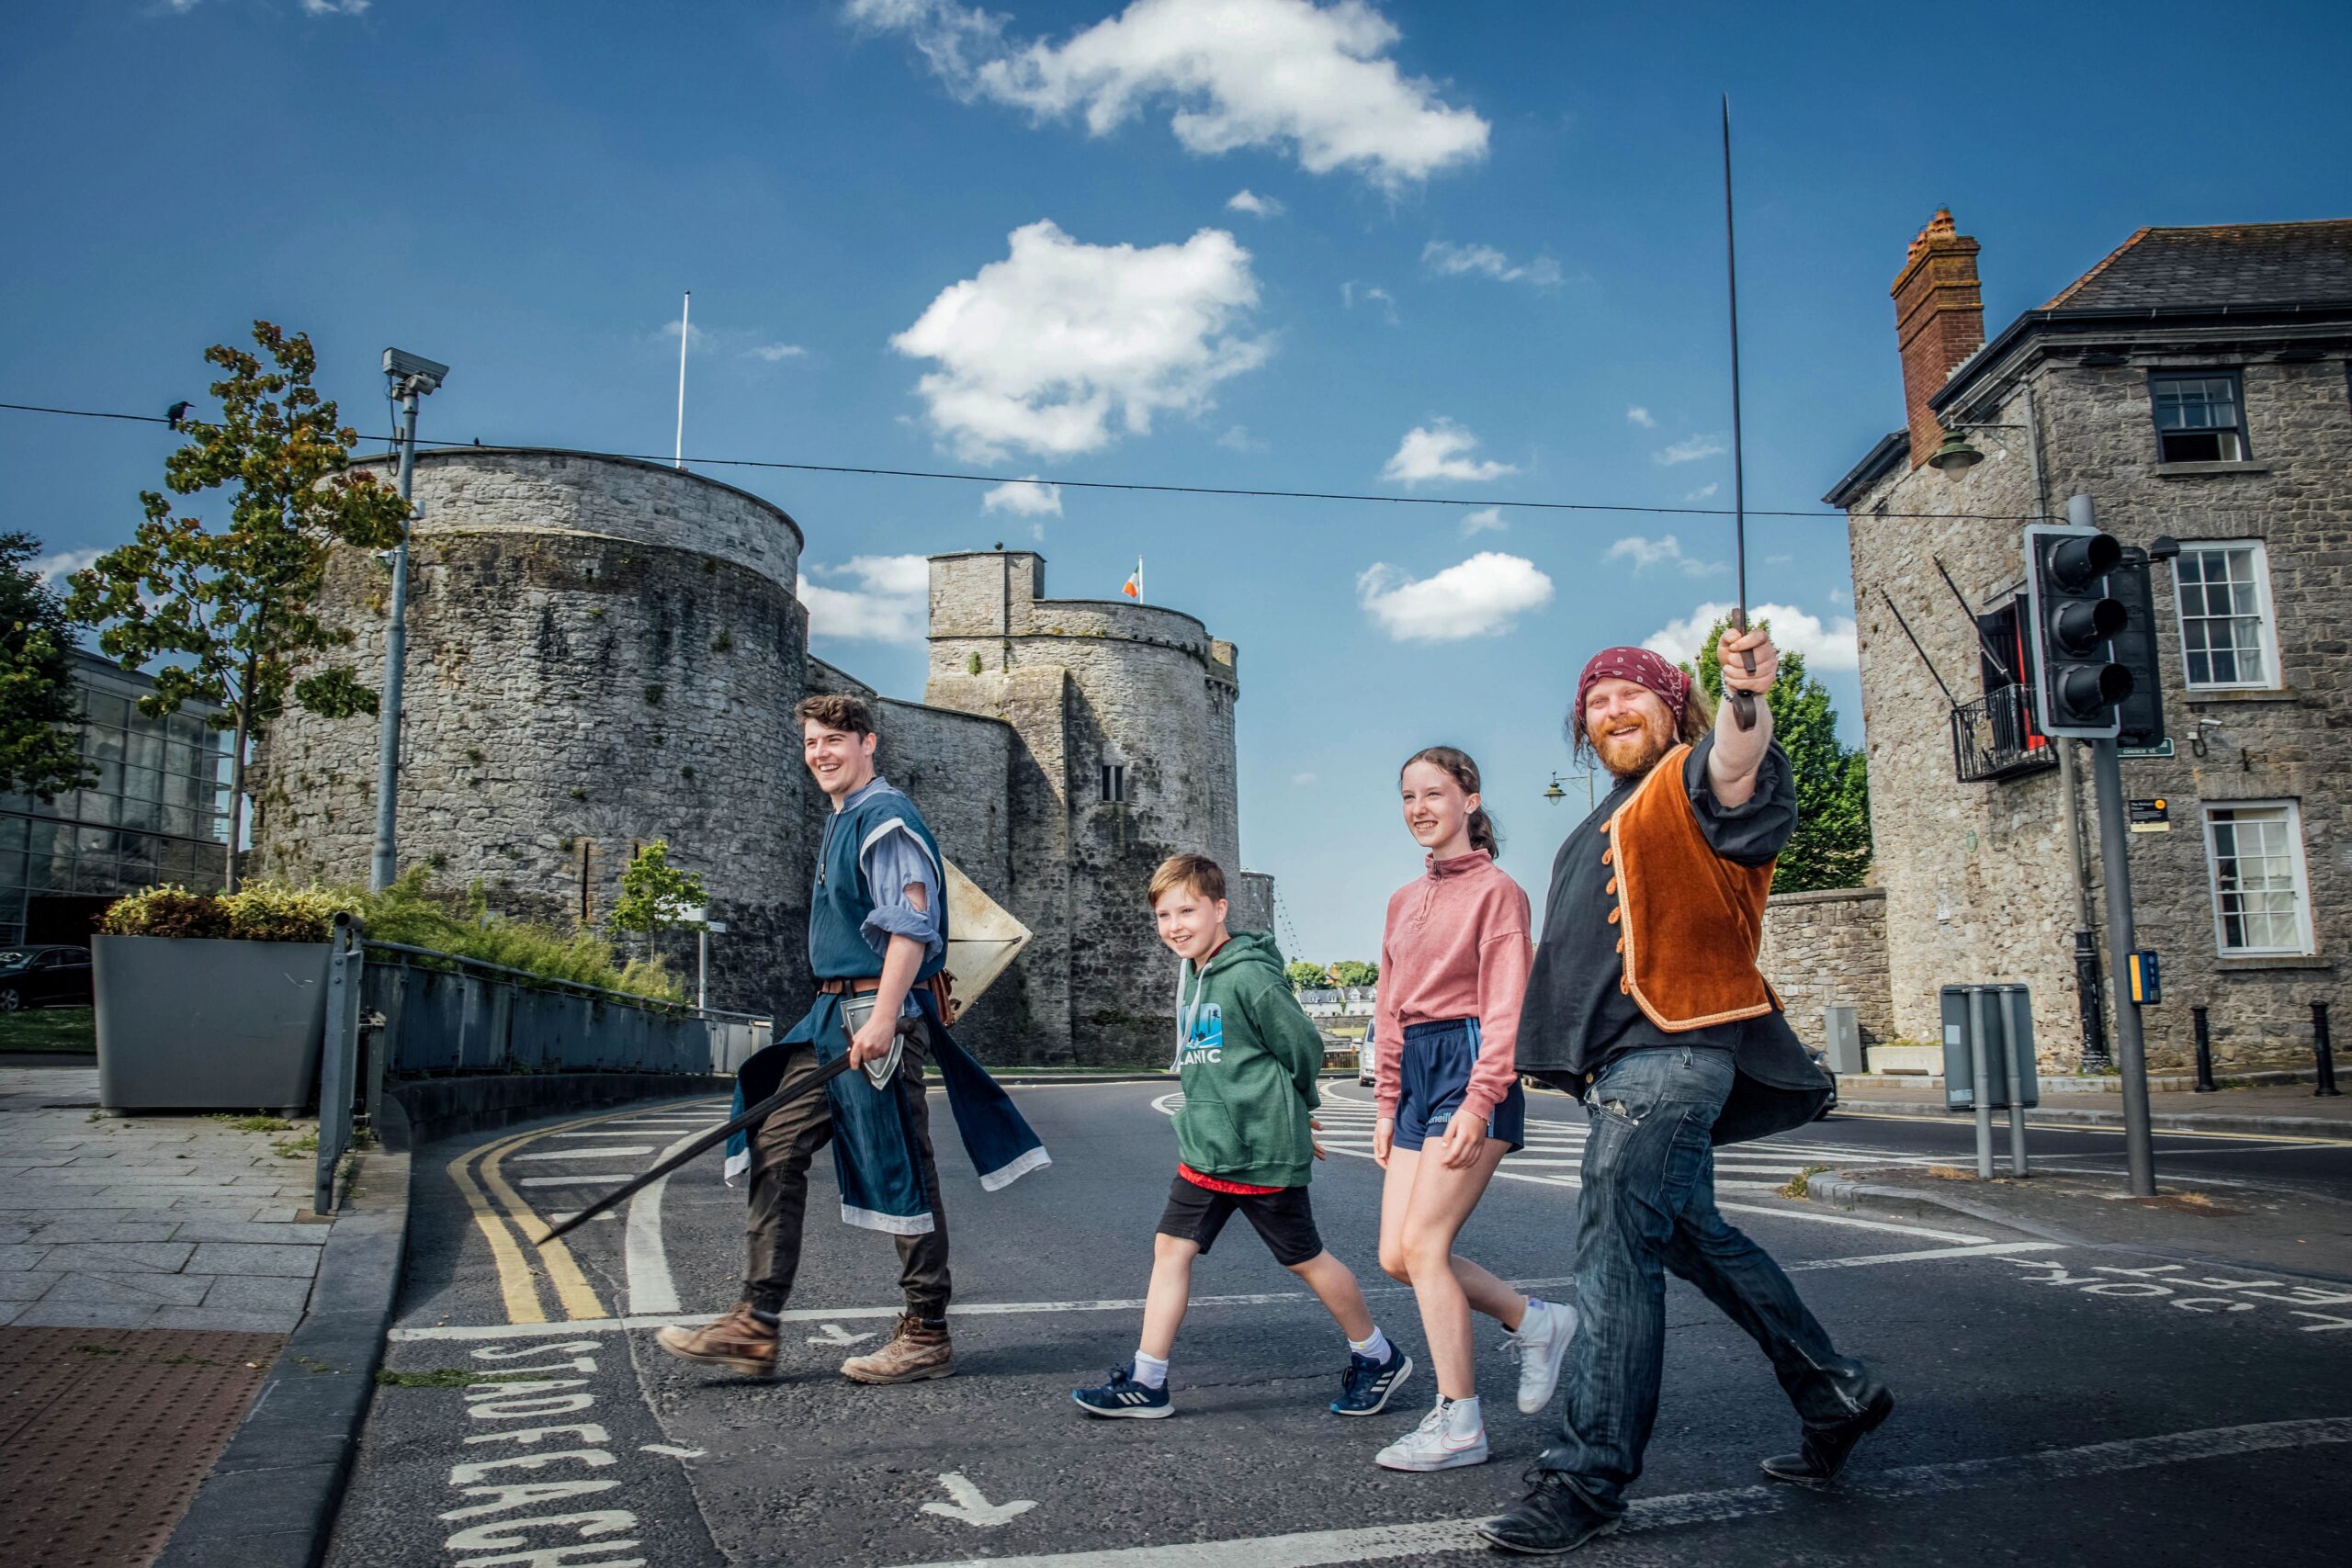 No Repro Fee Tadhg age 8 and Cliodhna age 10 Cunneen from Limerick pictured being shown around Limerick and the Castle by the animators at King Johns Castle as a New Discover Limerick Pass was launched and is the first Sightseeing Pass to launch on the Wild Atlantic Way The newly launched Discover Limerick Pass aims to boost tourism and offer convenient & great value sightseeing. Fáilte Ireland and Limerick City & County Council, in partnership with tourism partners and Open Pass UK, has today launched Limerick’s official Sightseeing Pass – the Discover Limerick Pass, the first destination sightseeing pass of its kind on the Wild Atlantic Way. The Discover Limerick Pass offers access to the top attractions in Limerick for a total price lower than paying for each attraction individually. Pic. Brian Arthur